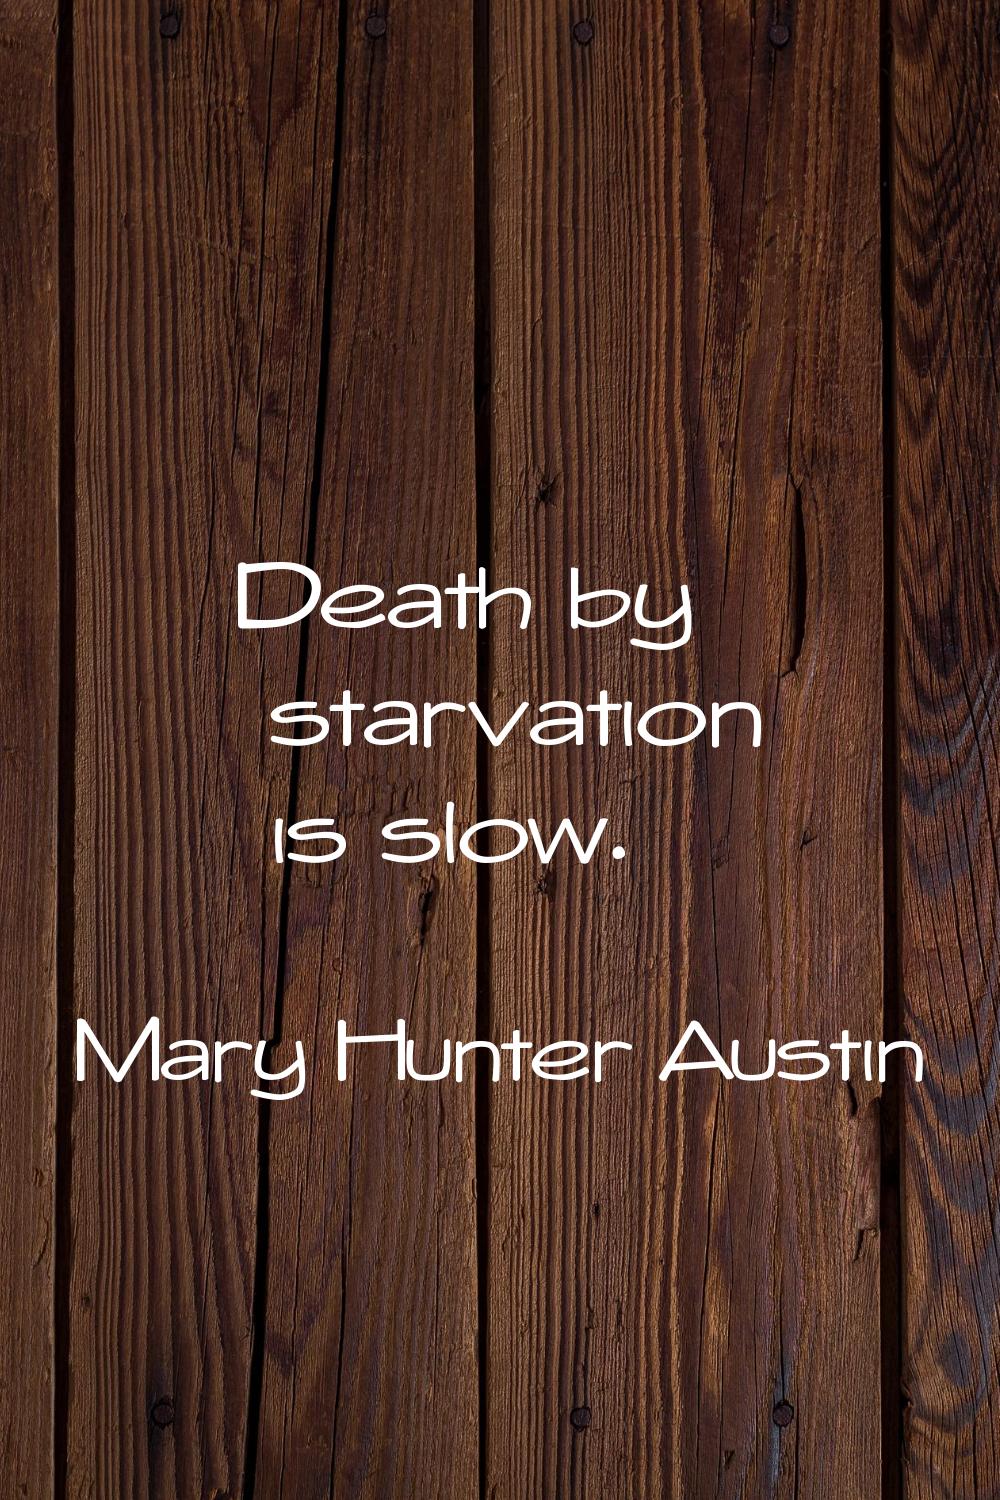 Death by starvation is slow.